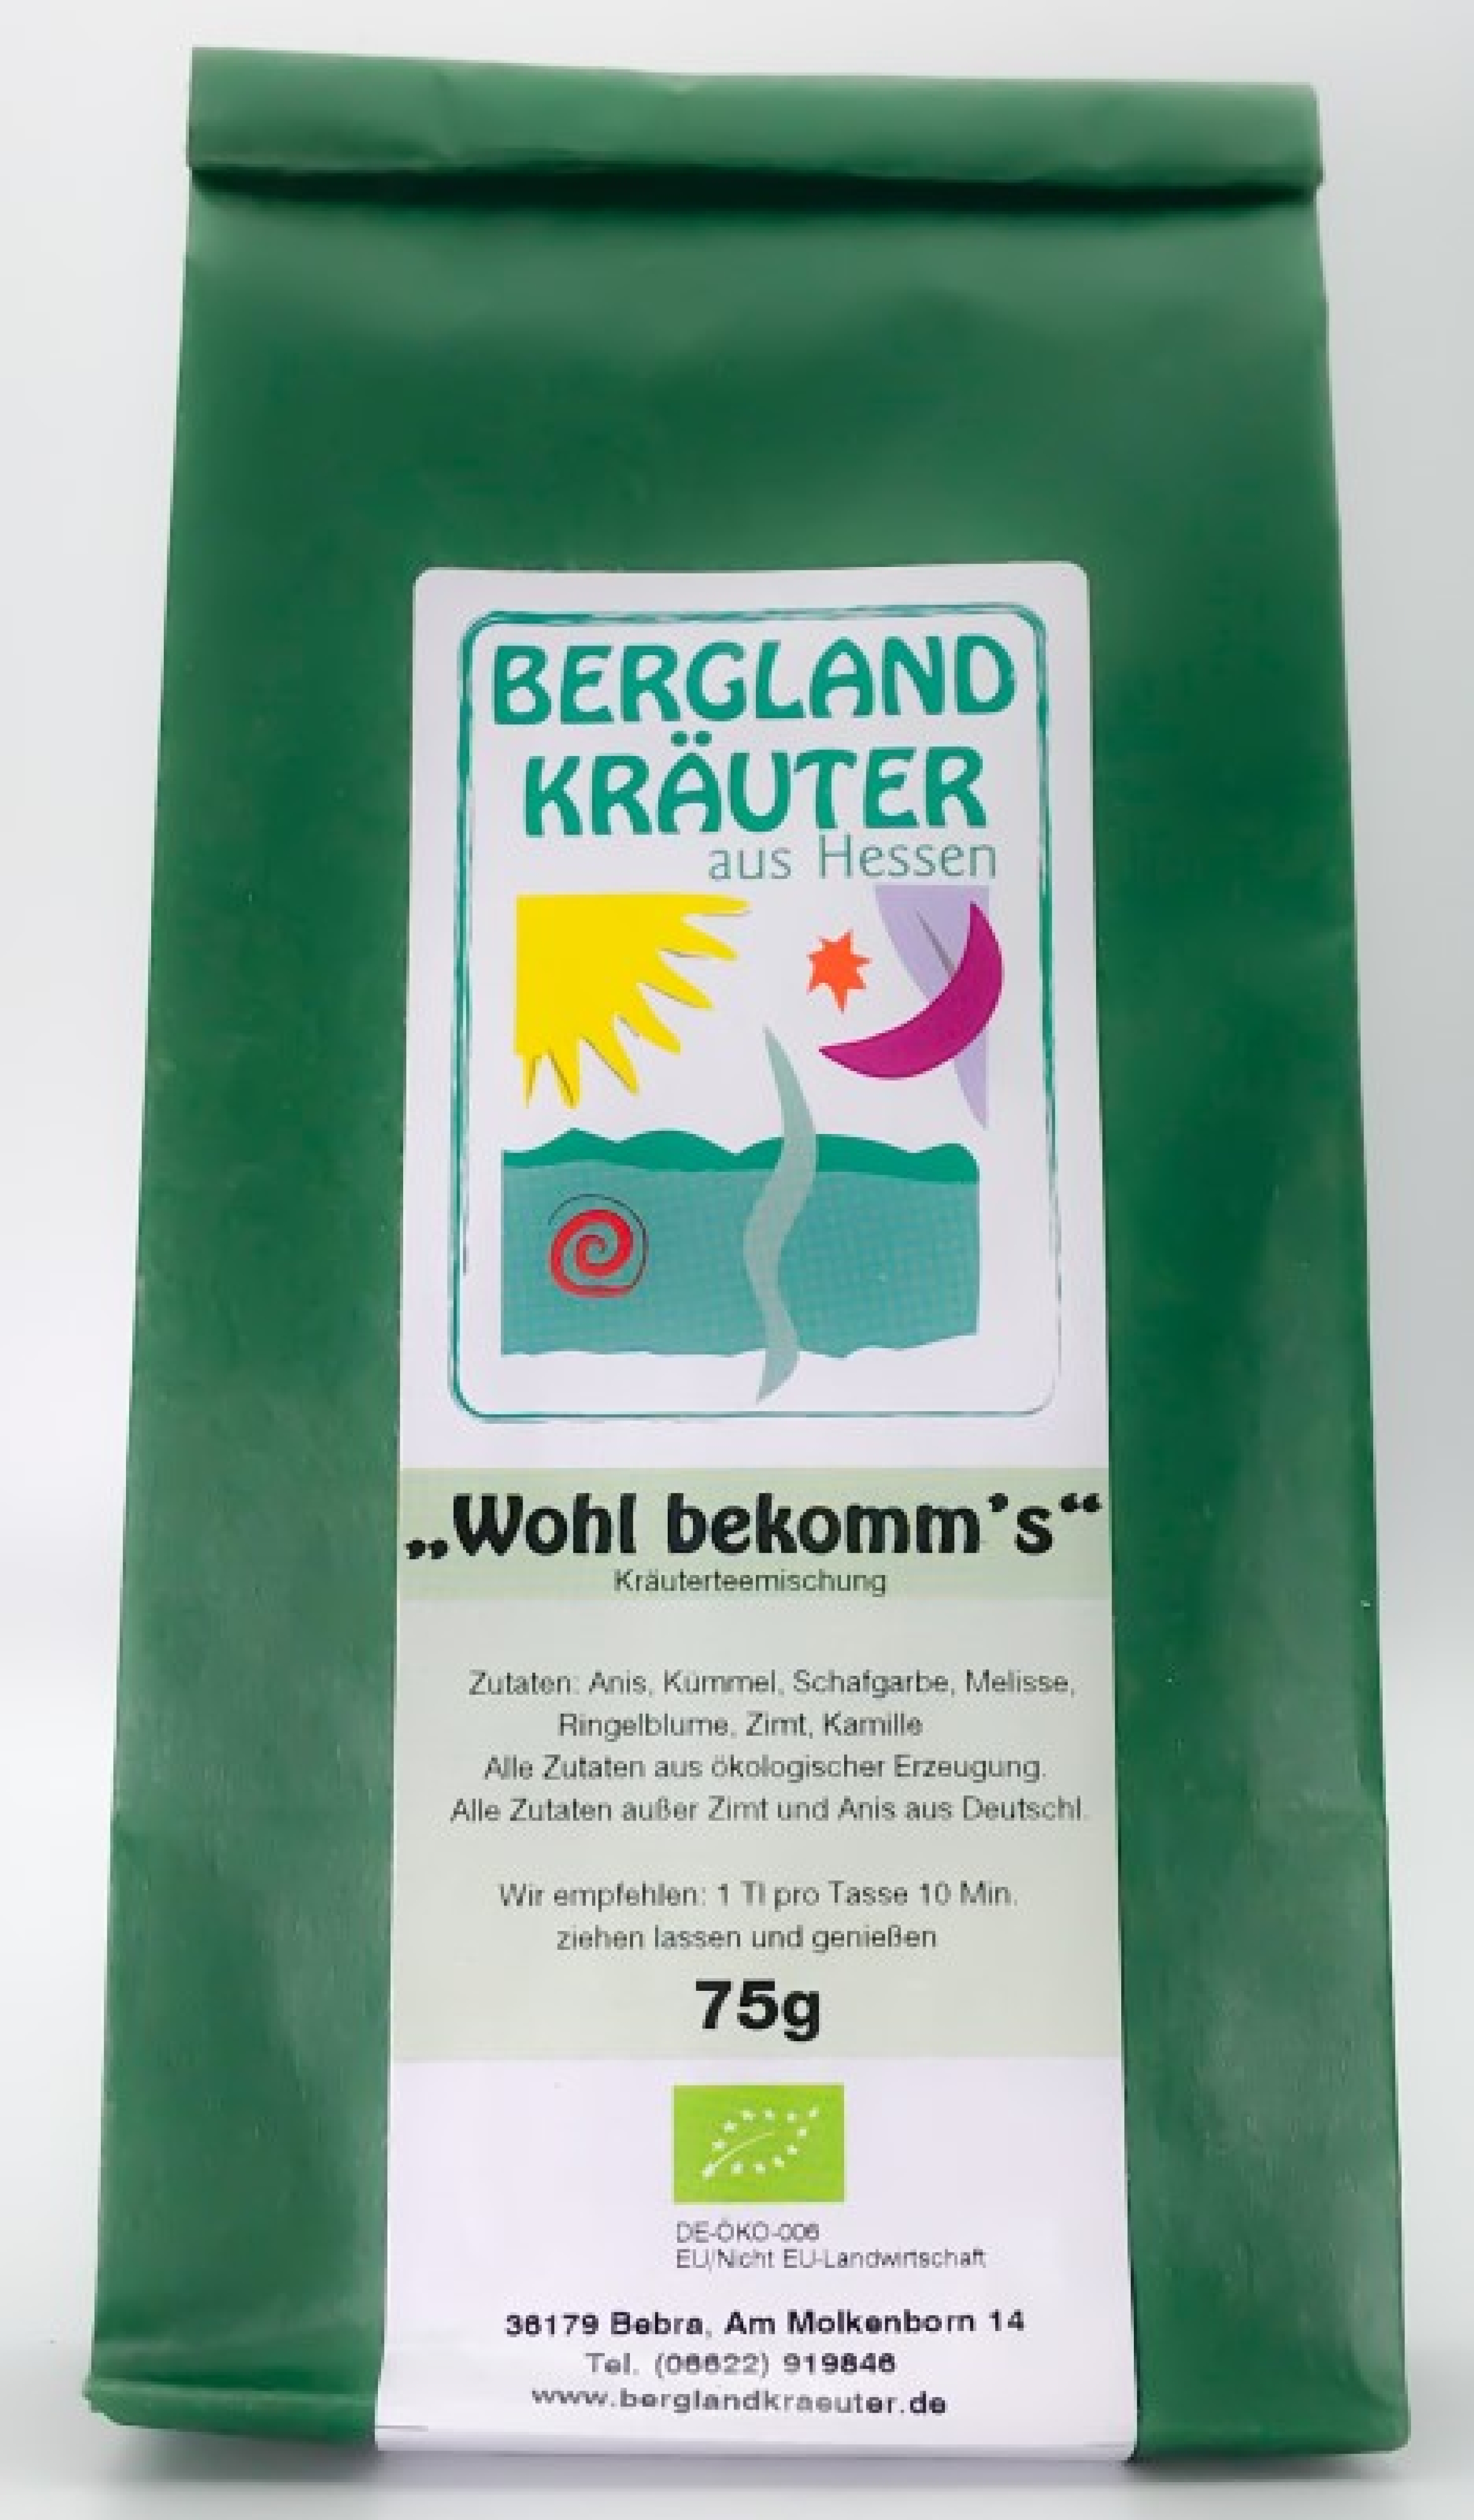 Wohl bekomm's, 75g